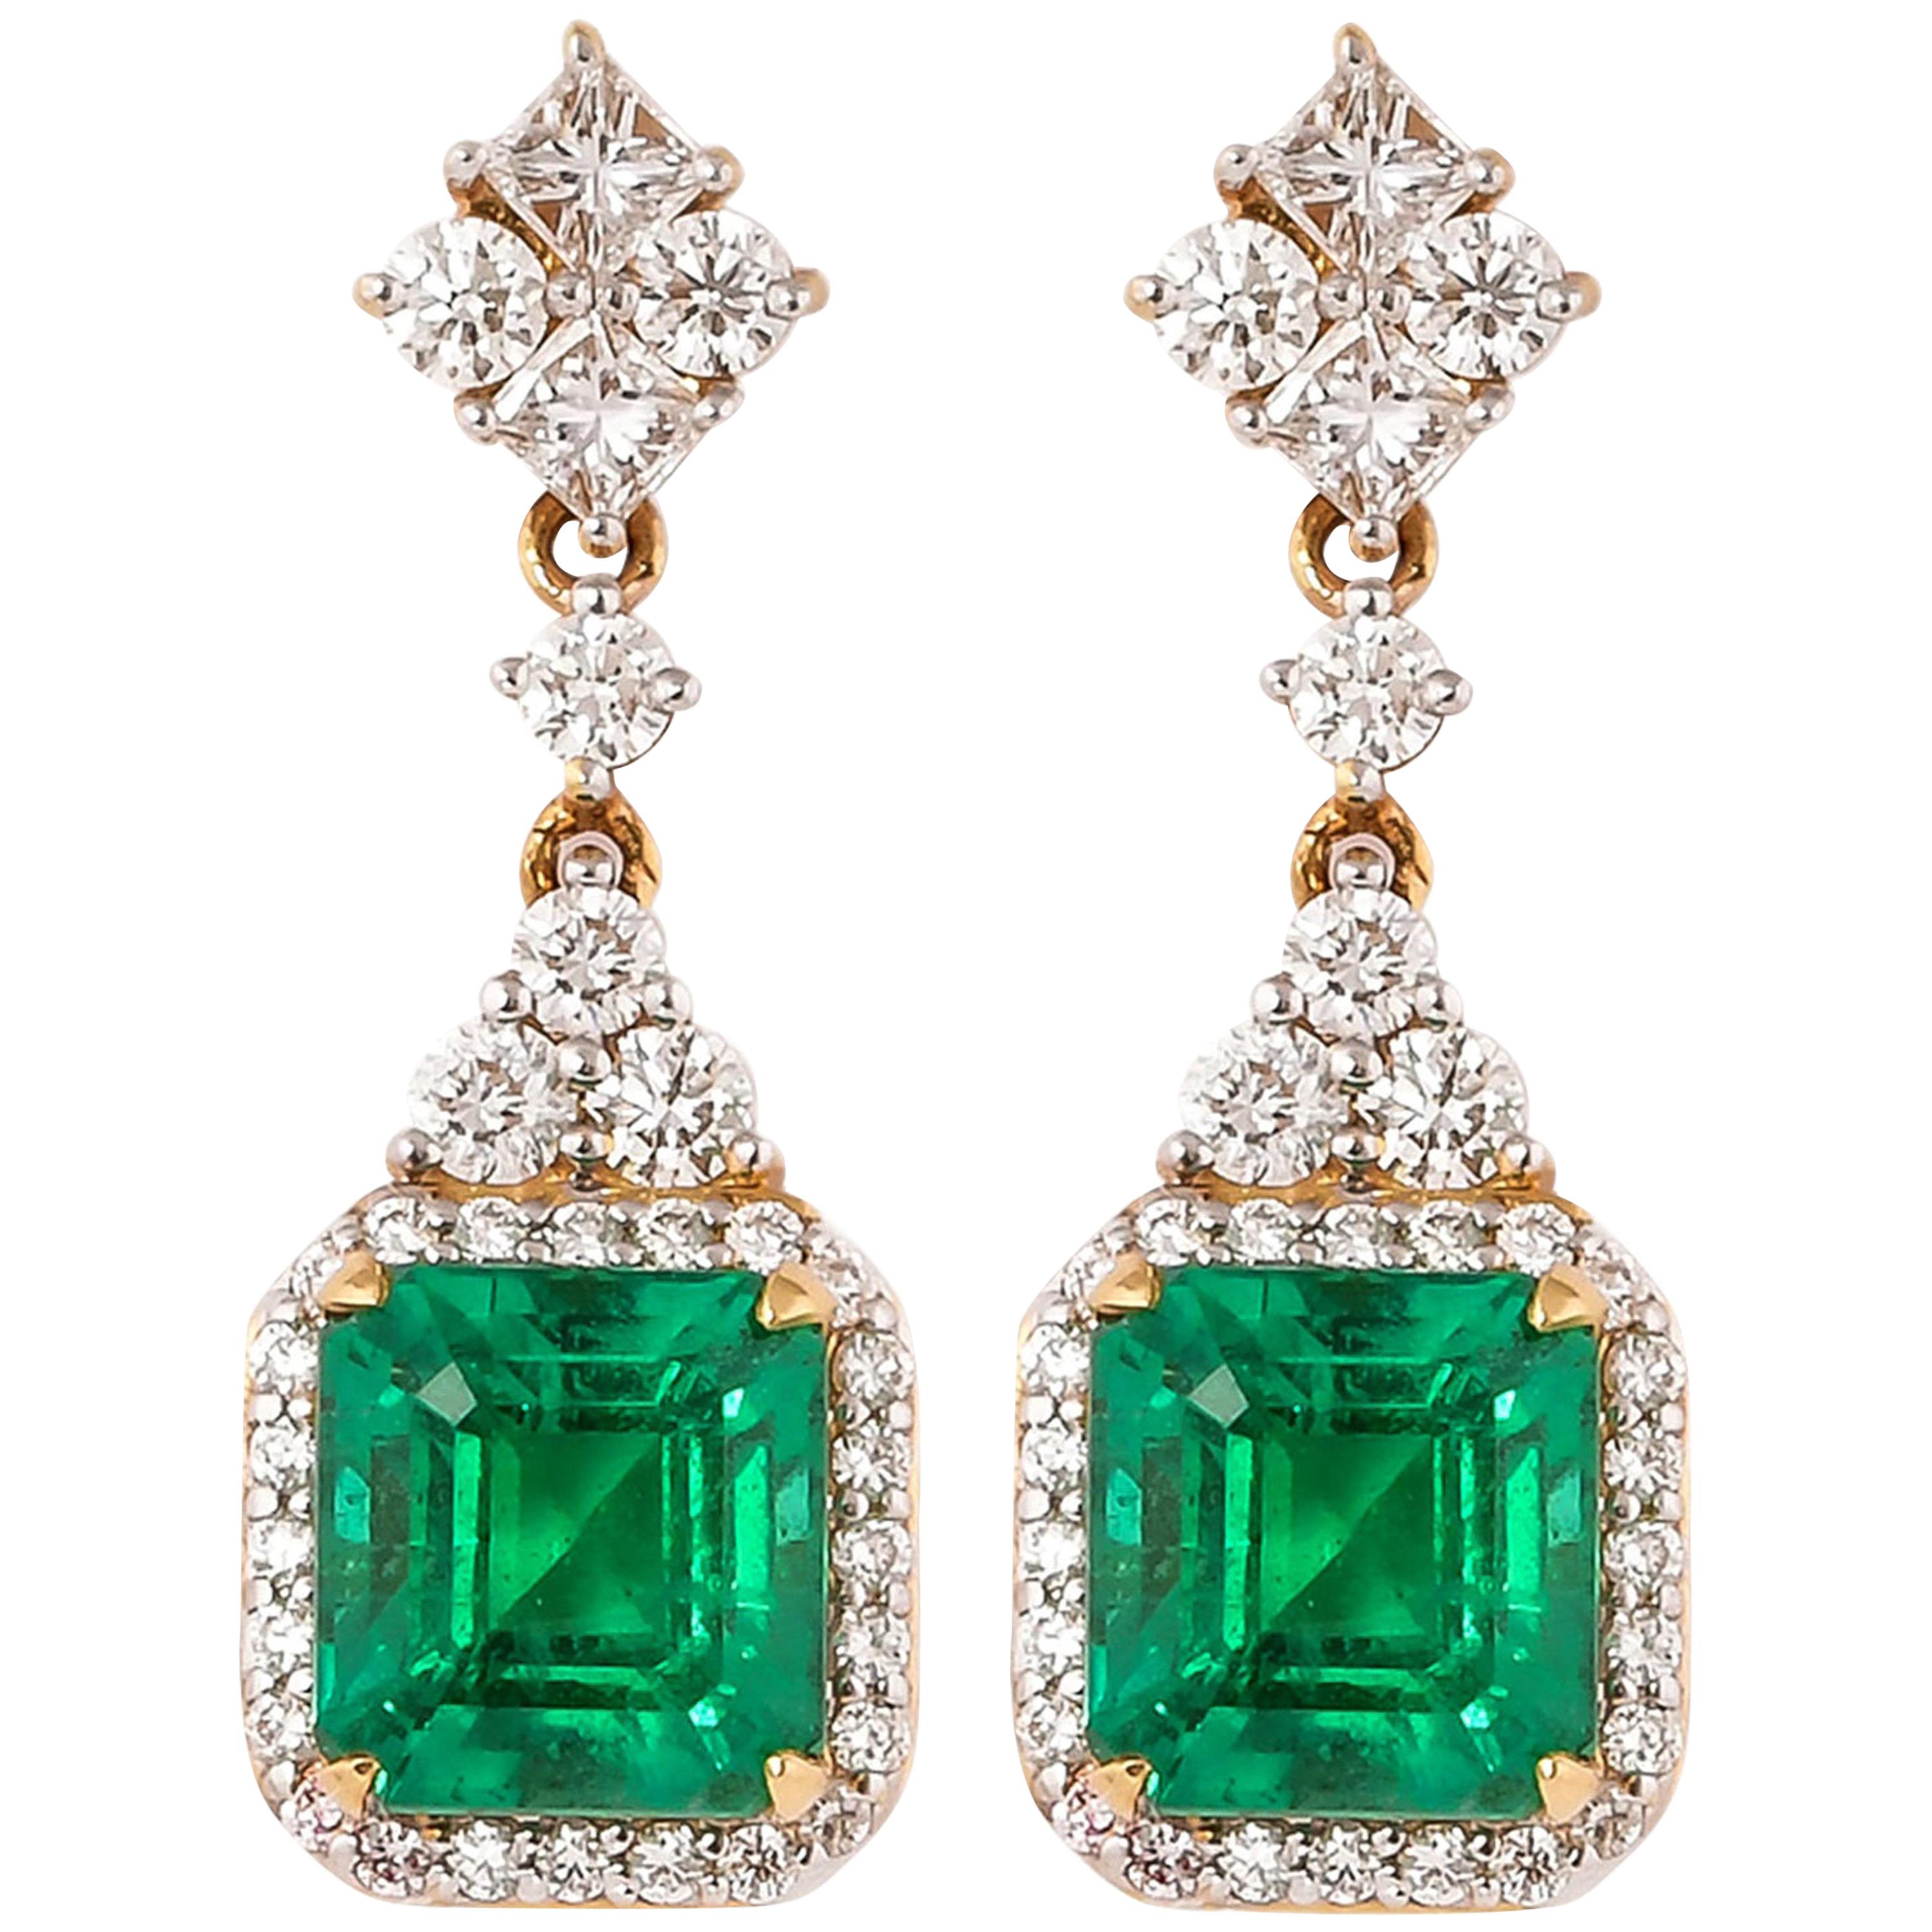 GRS Certified 5.0 Carat Emerald and Diamond Earrings in 18 Karat Yellow Gold For Sale